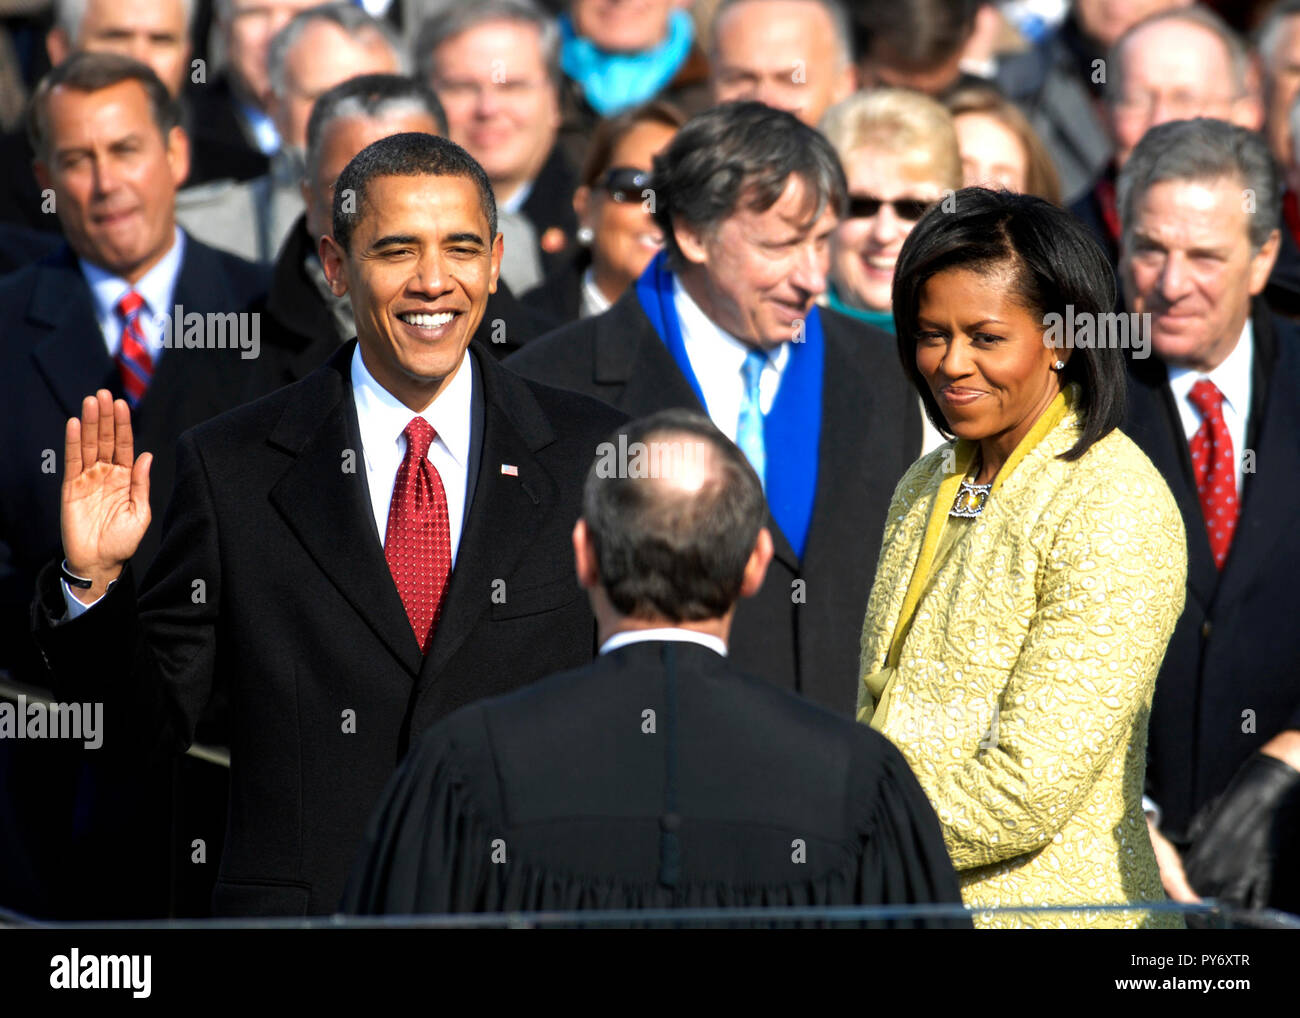 With his family by his side, Barack Obama is sworn in as the 44th president of the United States by Chief Justice of the United States John G. Roberts Jr. in Washington, D.C., Jan. 20, 2009. DoD photo by Master Sgt. Cecilio Ricardo, U.S. Air Force Stock Photo